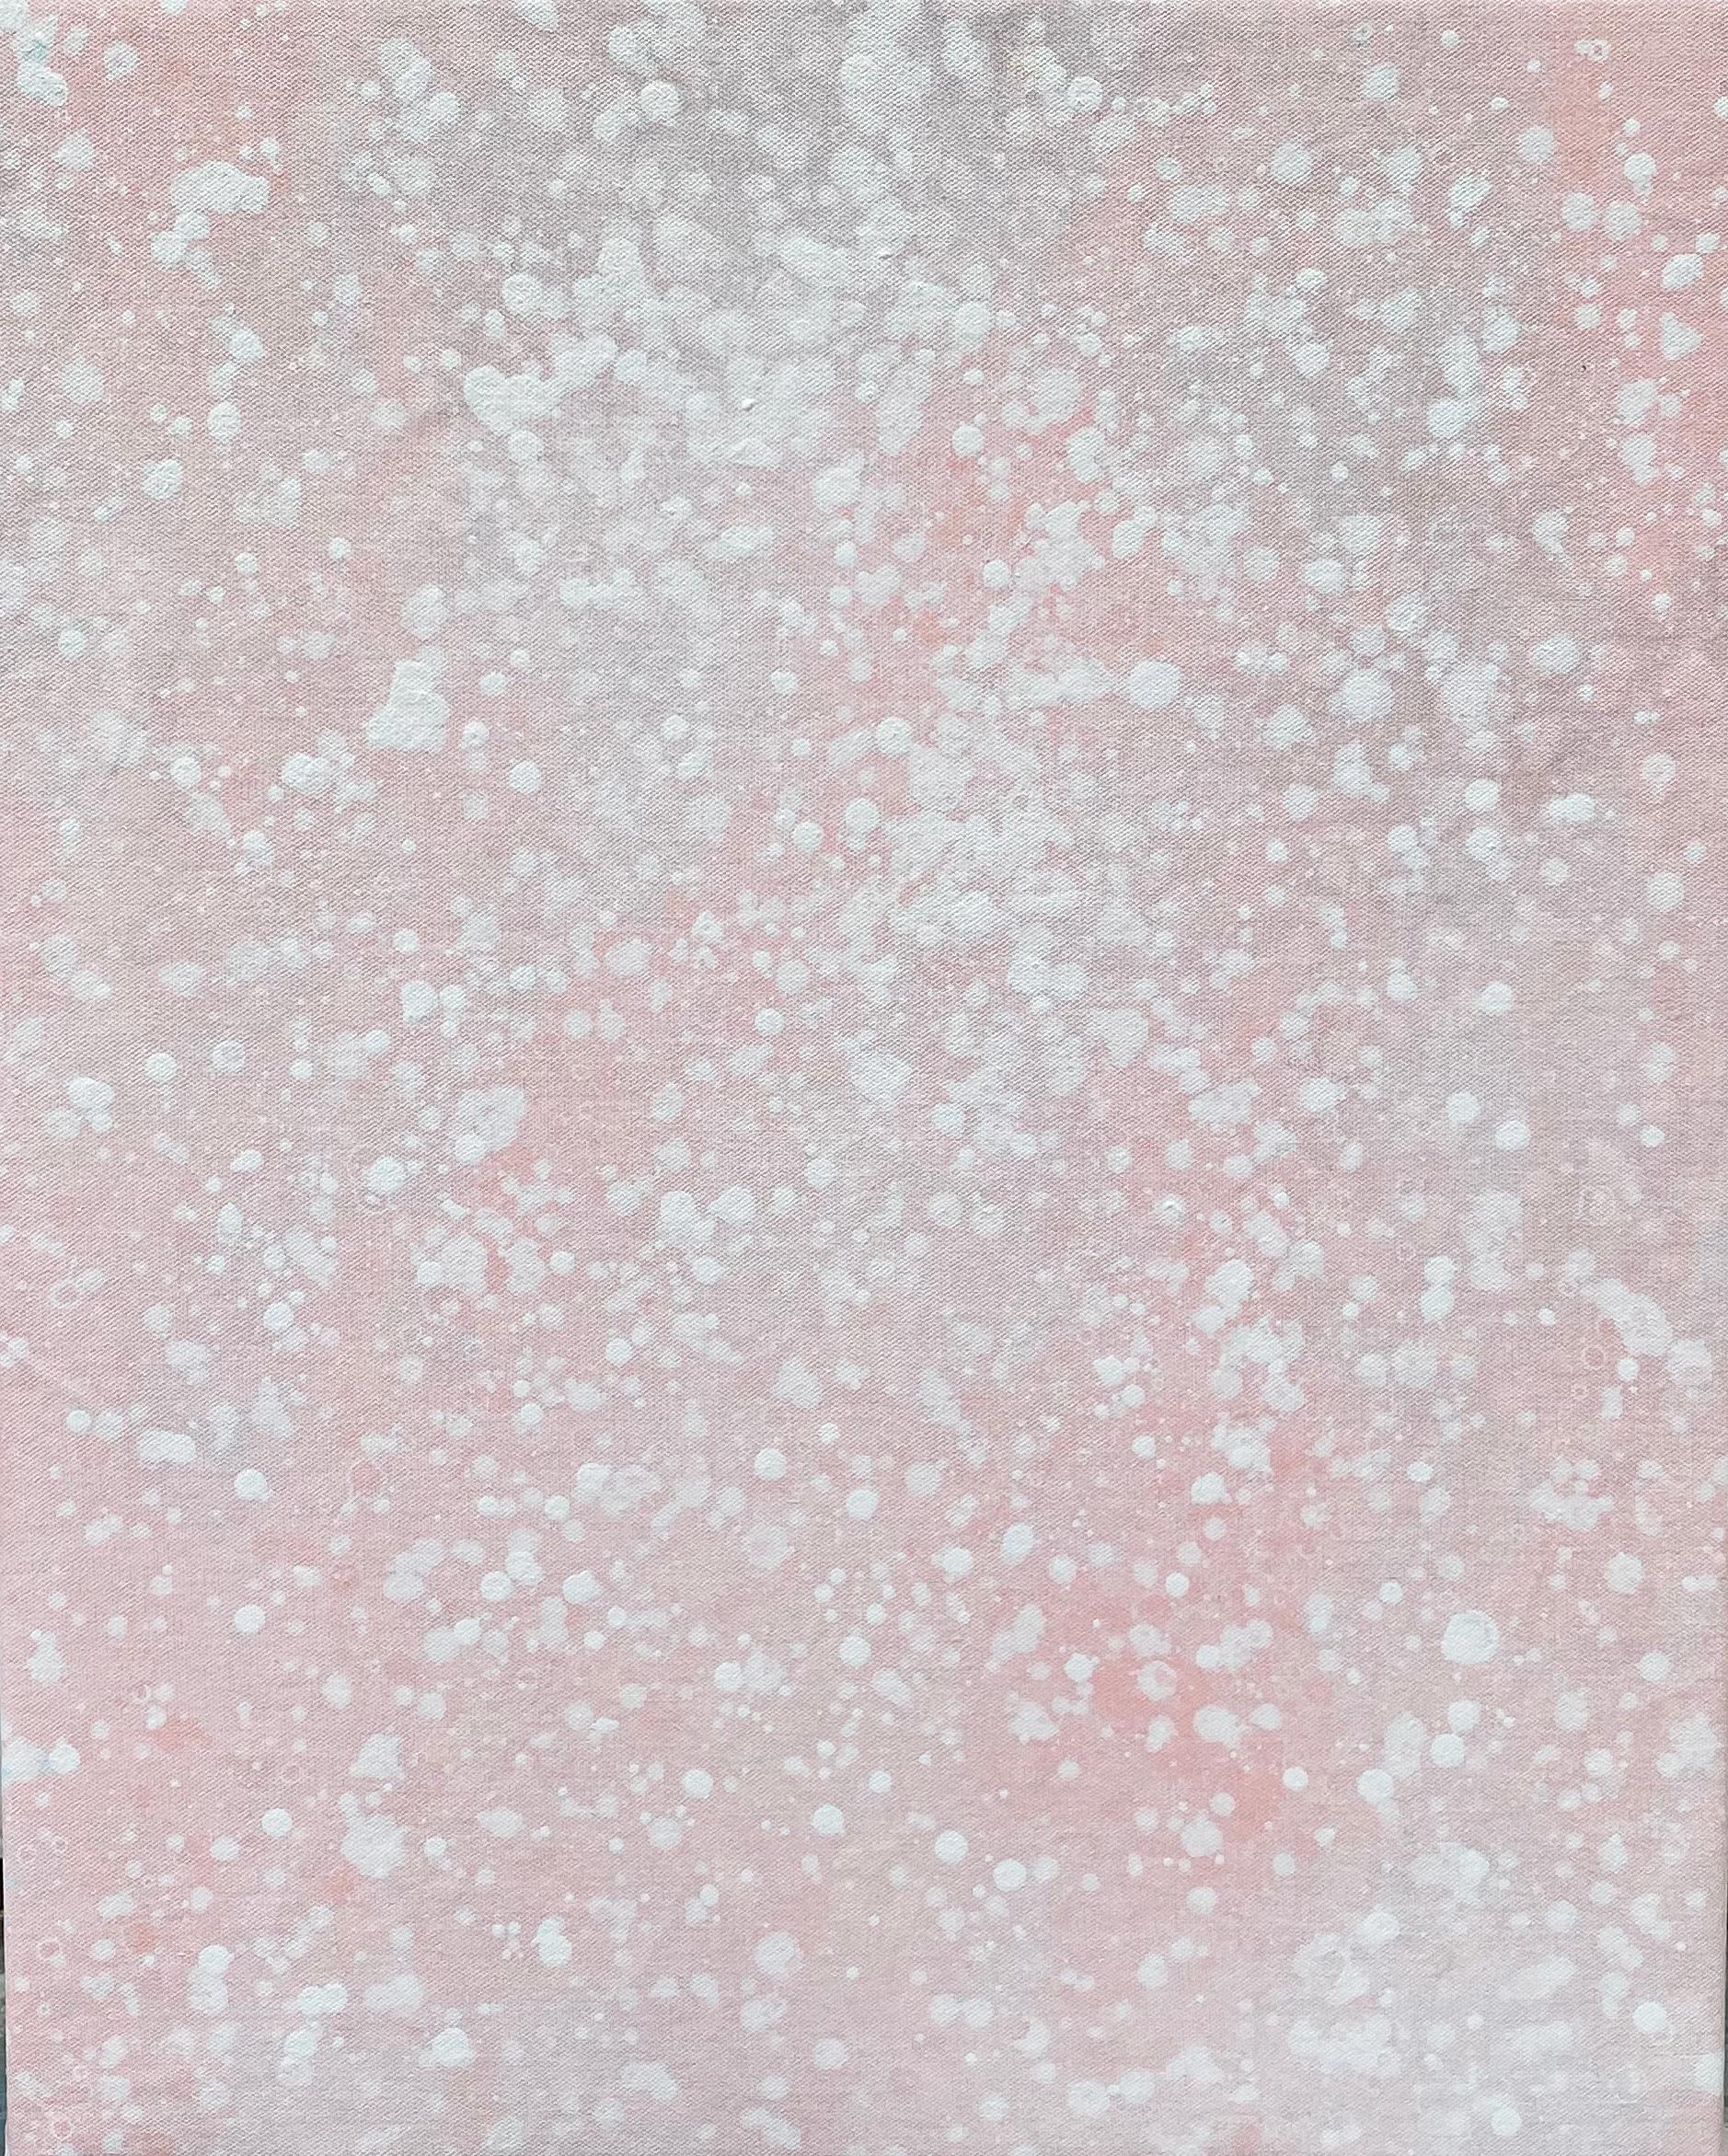 Its snowing pastel light pink dot abstract minimal expressionist modern painting